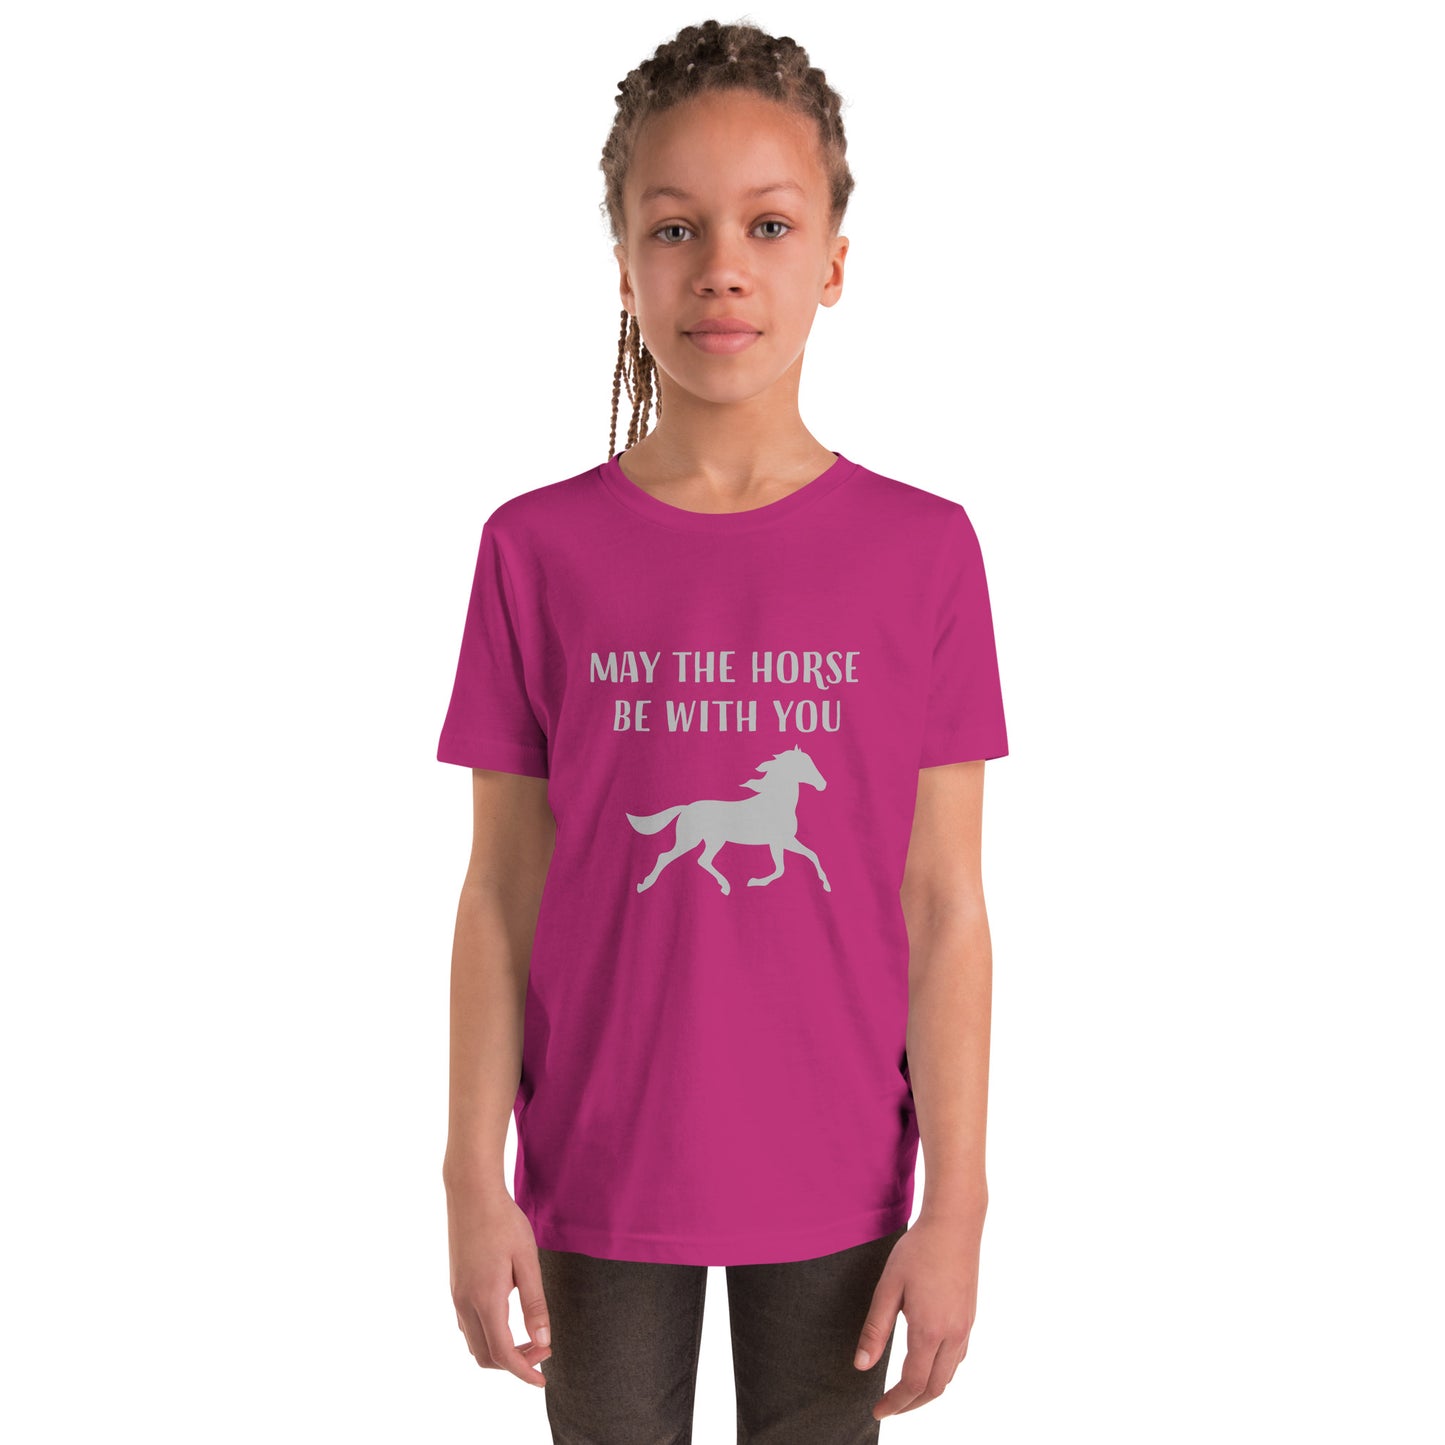 May the Horse be with You - Youth Short Sleeve T-Shirt